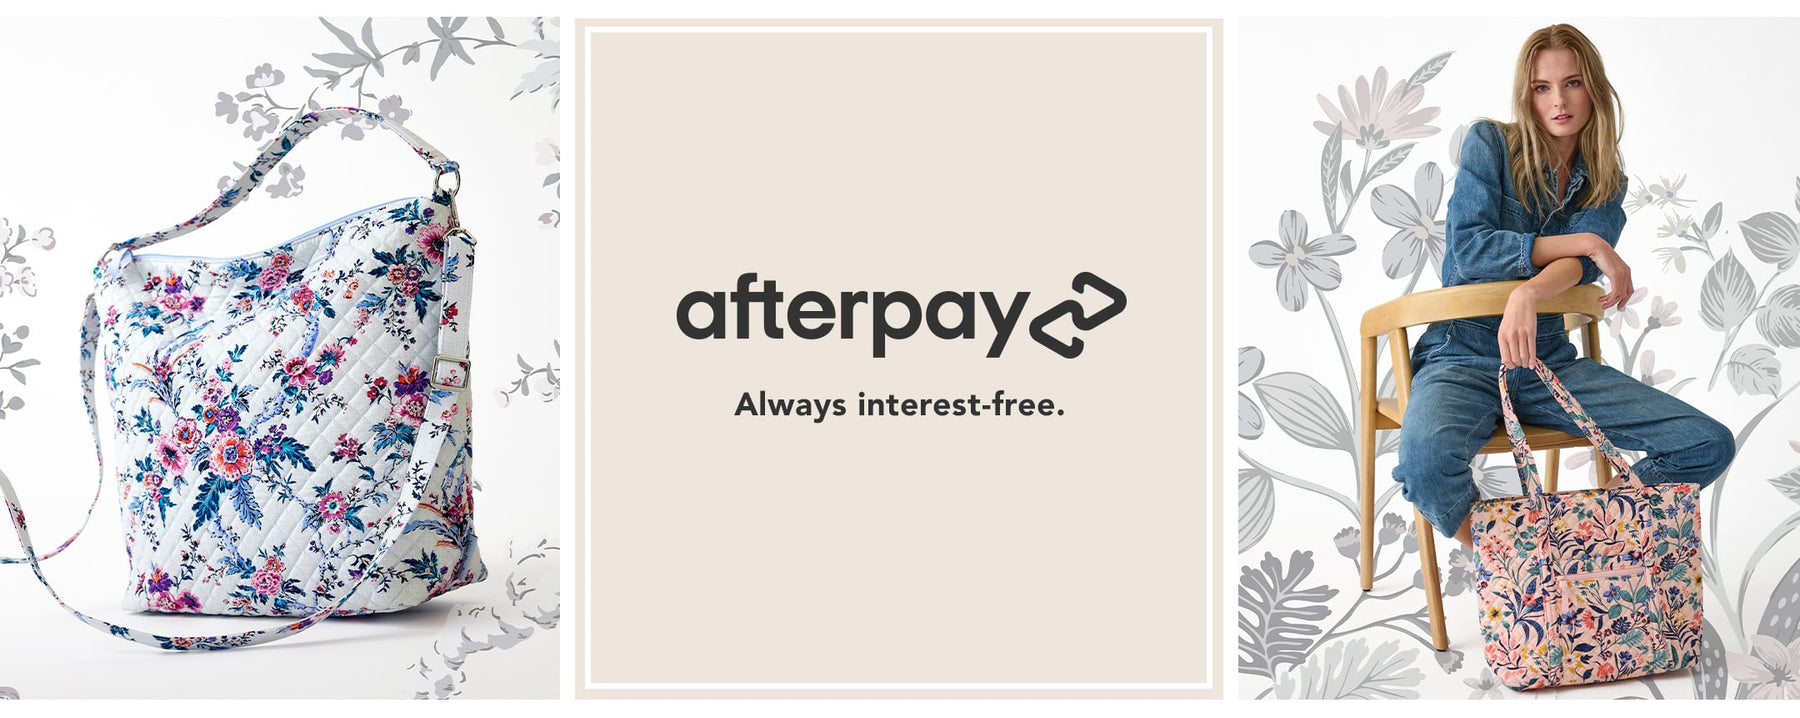 Afterpay. Always interest-free